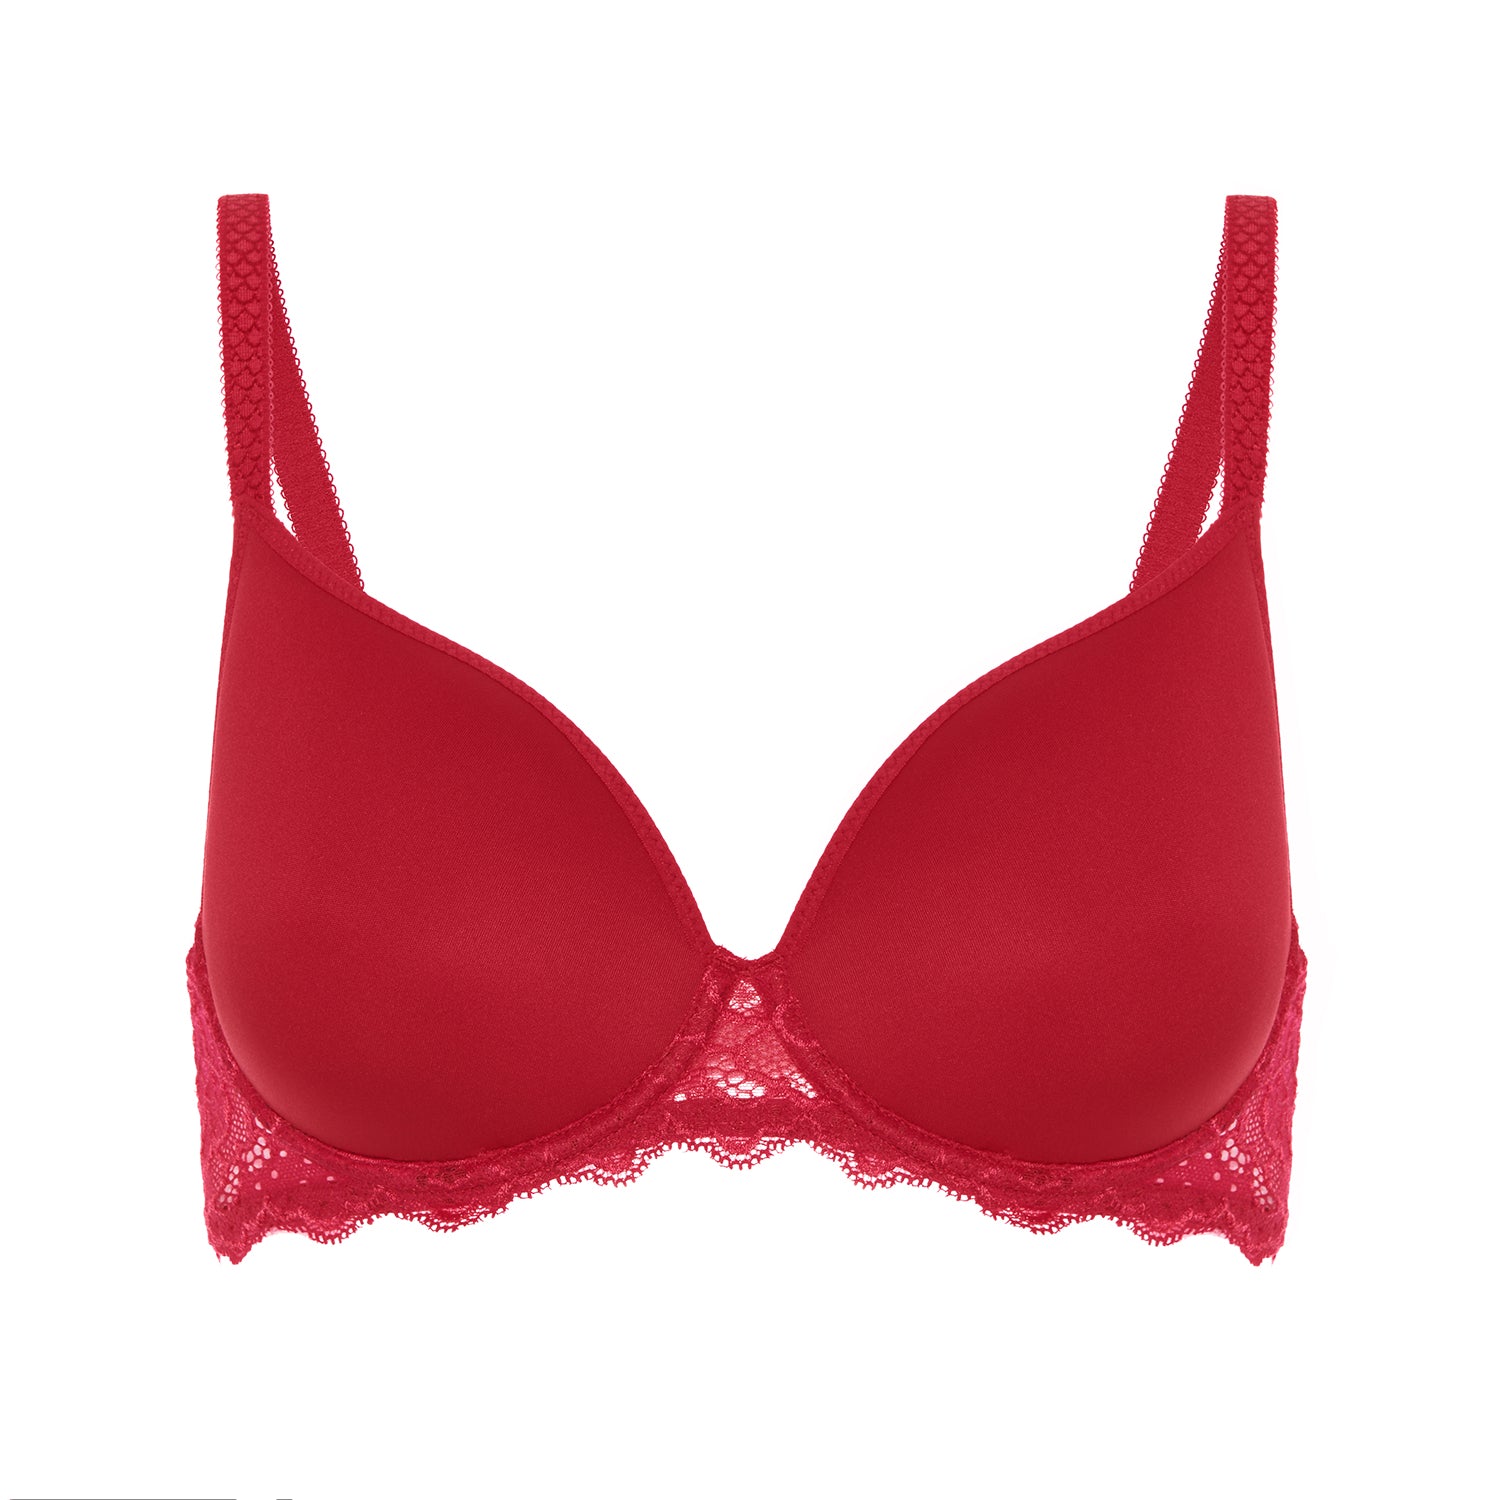  Womens Minimizer Bra Plus Size Underwire Smooth Full  Coverage Seamless Bras True Red 32F